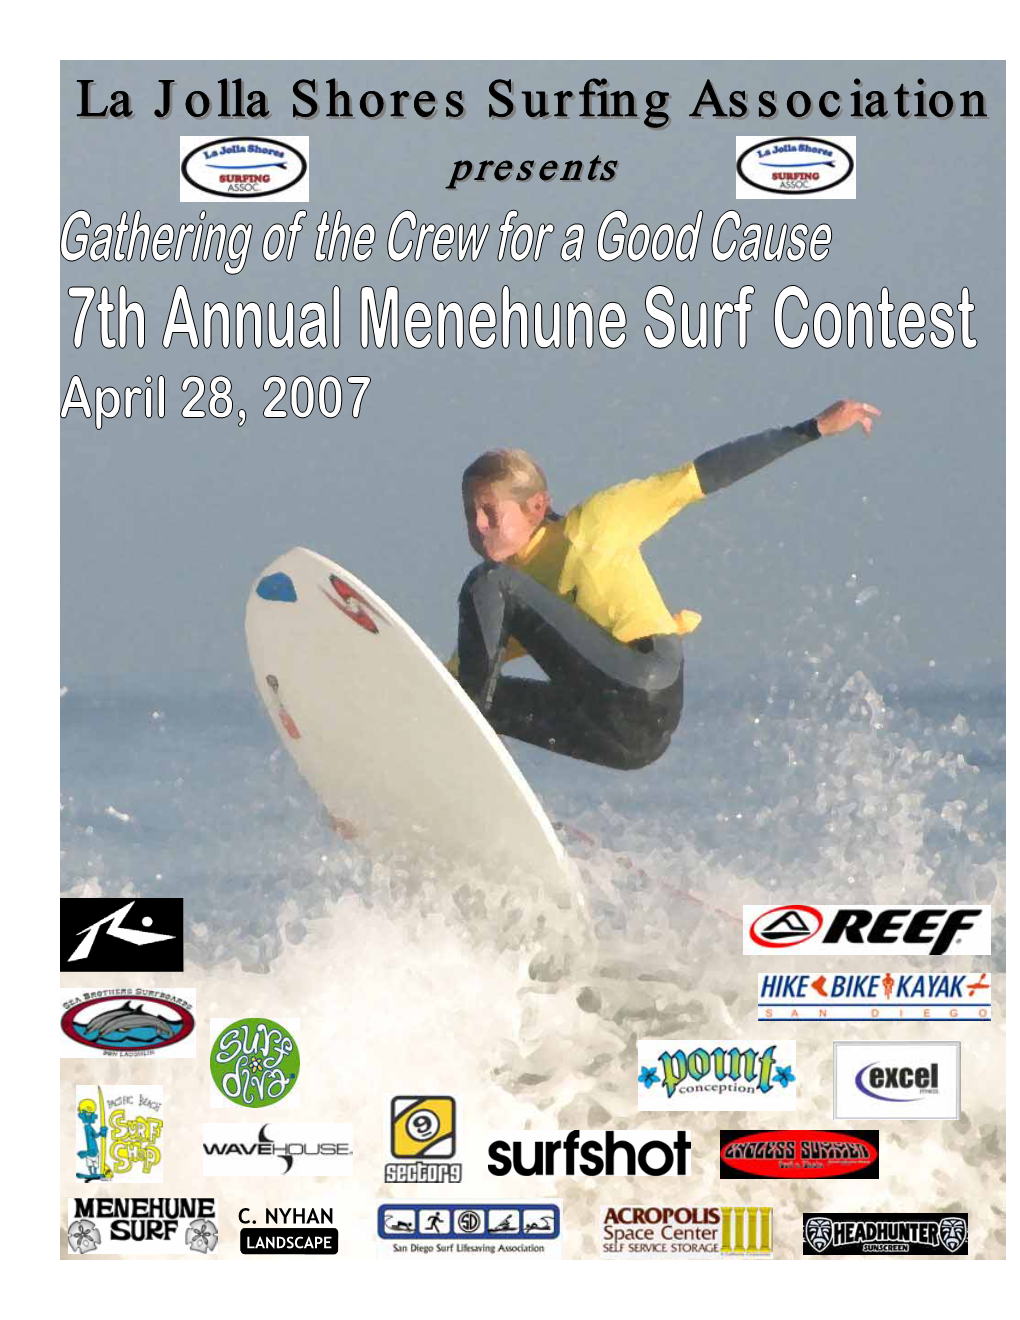 La Jolla Shores Surfing Association Member Member NY Association Surfing Shores Jolla La the Beach Or Give Him a Call to Learn More